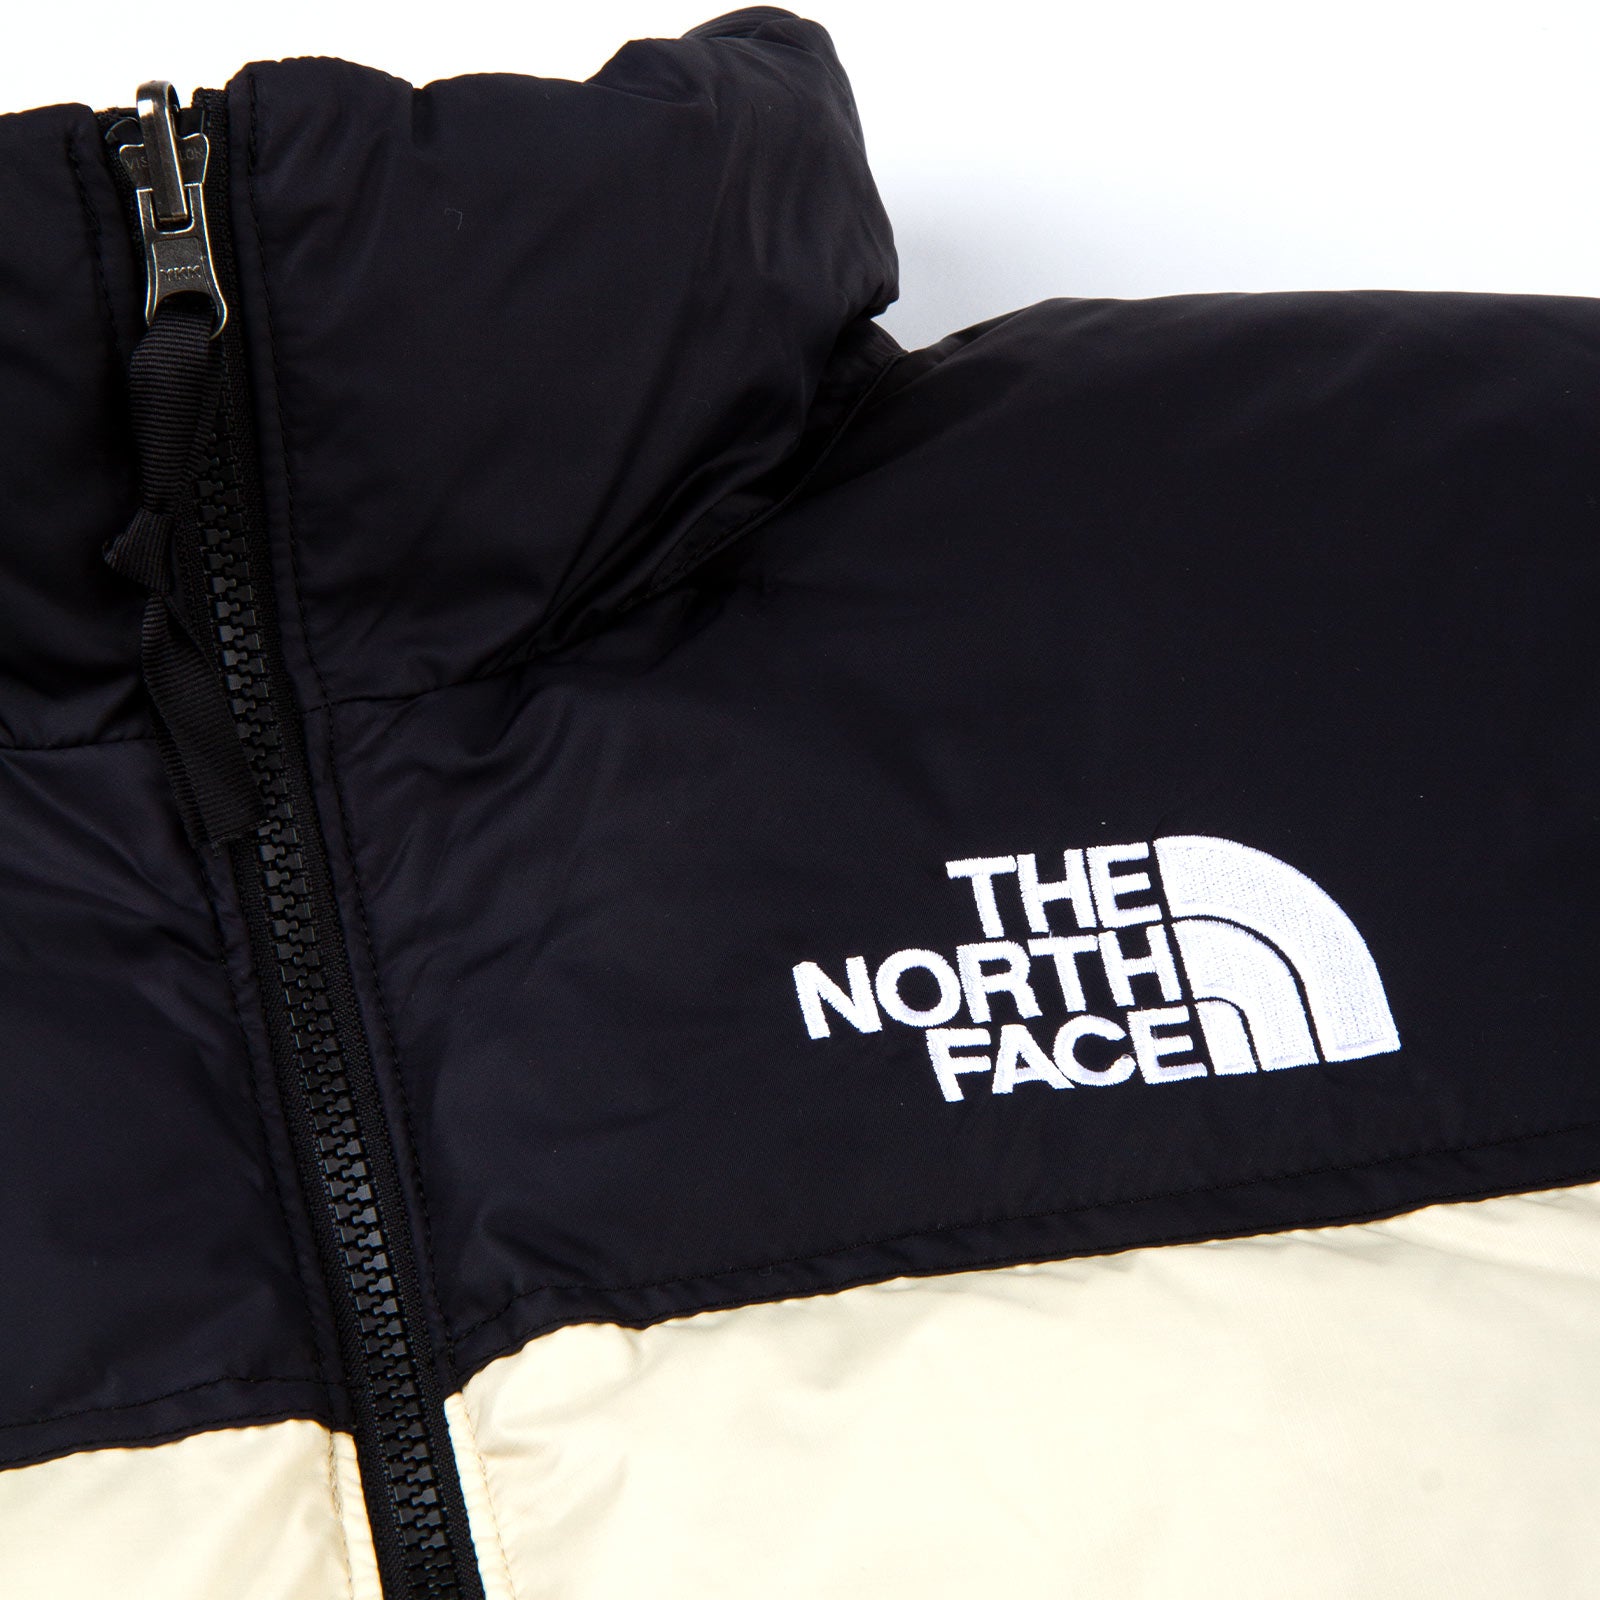 The North Face M 1996 Retro Nupste Jacket